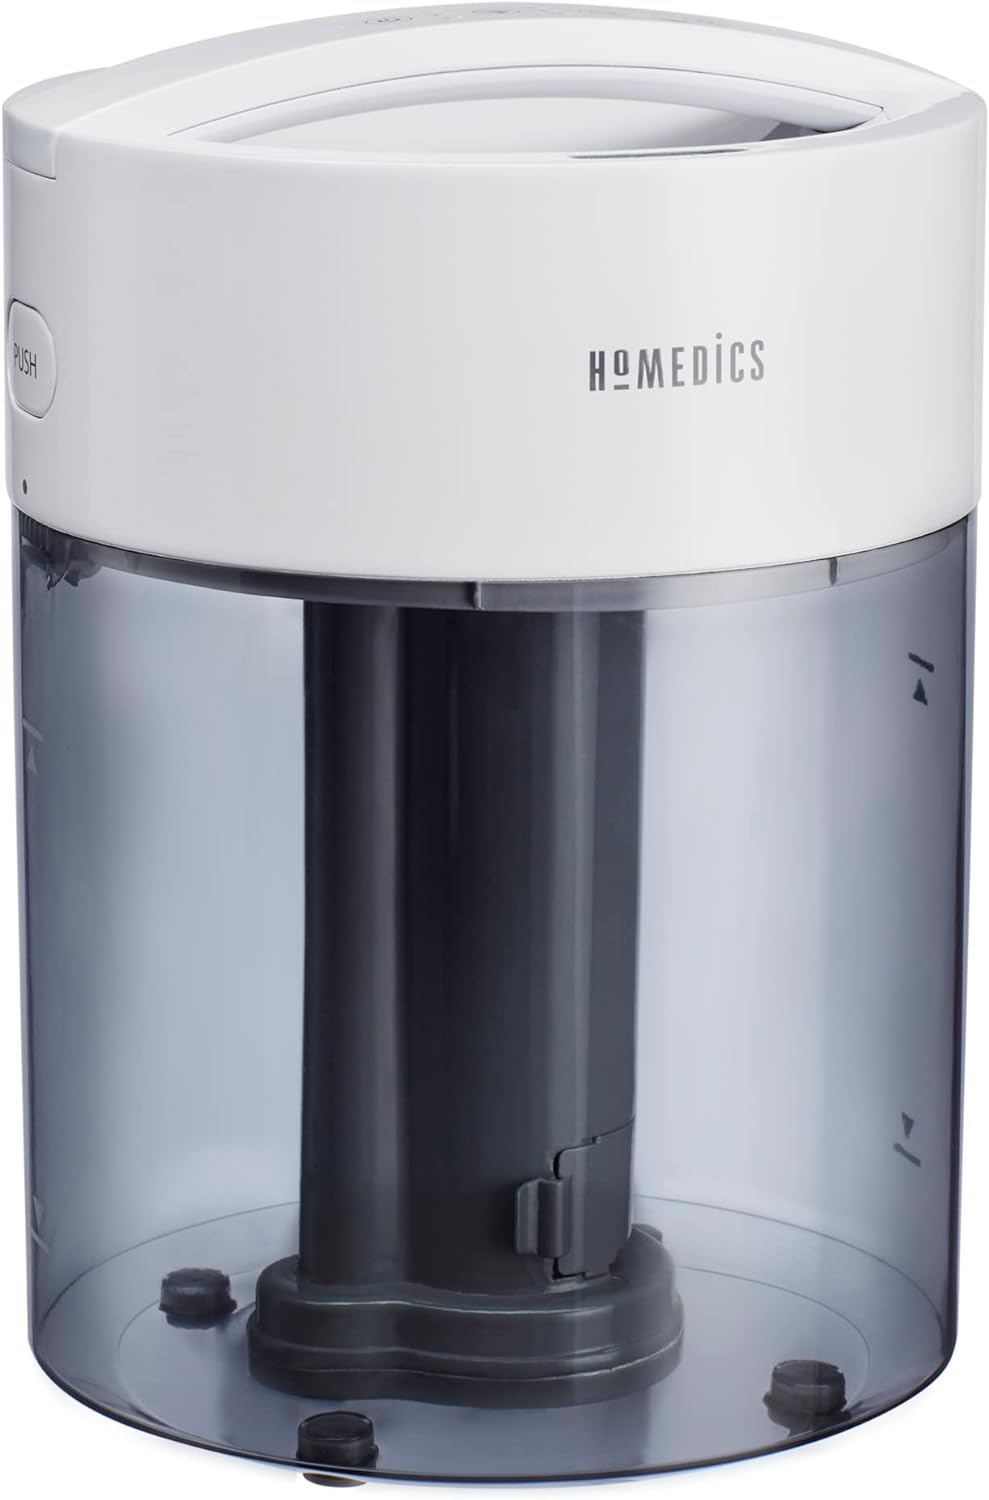 HoMedics Humidifiers for Bedroom, Home, Nursery, Office and Plants. Total Comfort UV-C Ultrasonic Humidifier, Leak Resistant Design, 0.97 Gallon Tank, 35 Hour Run Time, Quiet, Cool Mist, Night Light